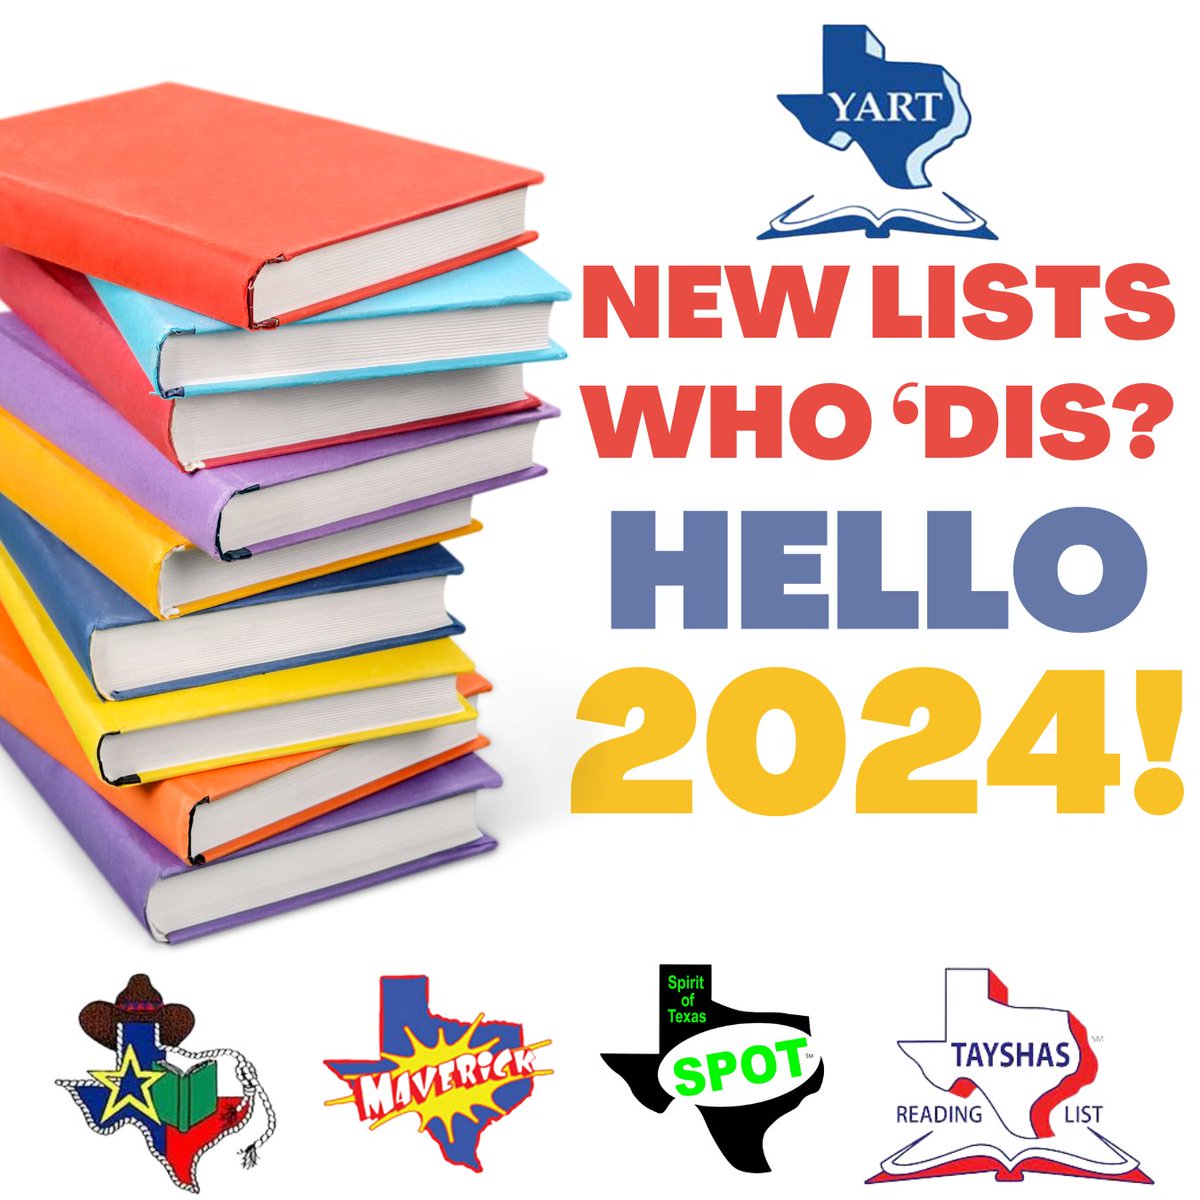 Coming in 🔥HOT🔥for 2024 with the latest lists from #yartxla ! Stay tuned!
#LoneStarList
#MaverickList
#SPOTTX
#TayshasList